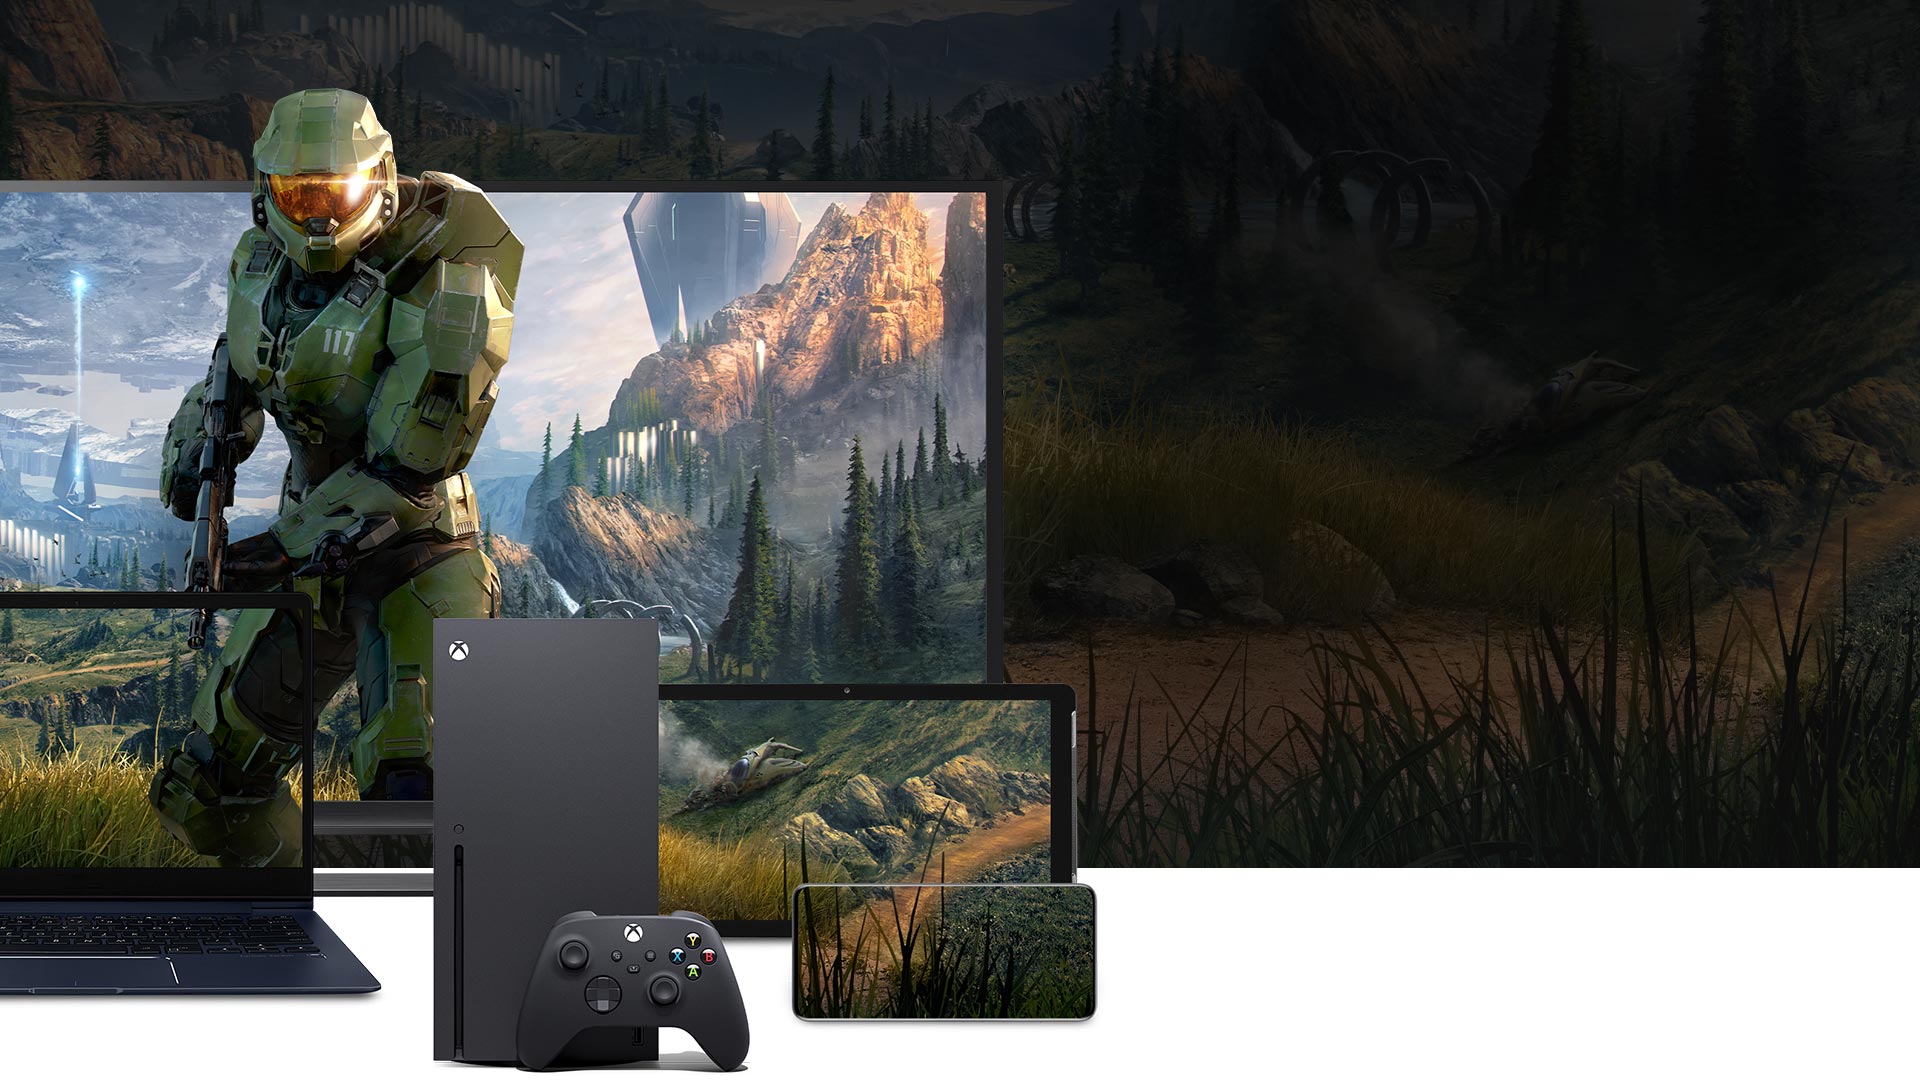 Xbox Series X console with a PC, tablet and phone featuring Master Chief from Halo Infinite.